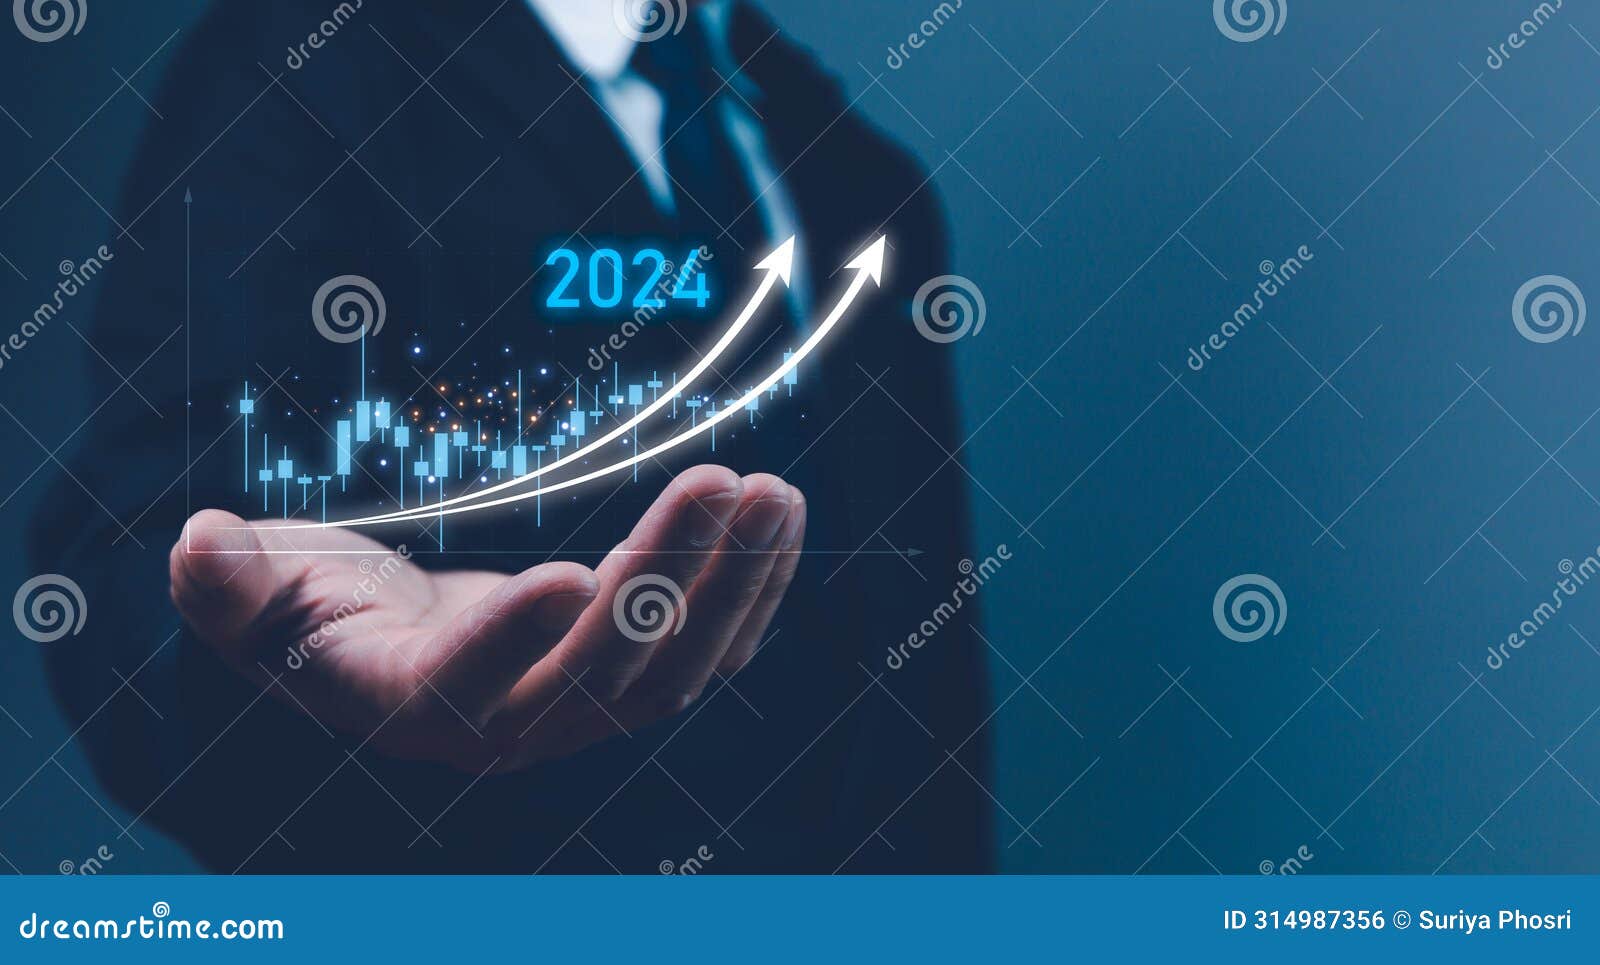 explore the future of finance. virtual screenshot of the economic outlook, stocks, and trading markets for 2024. man displays